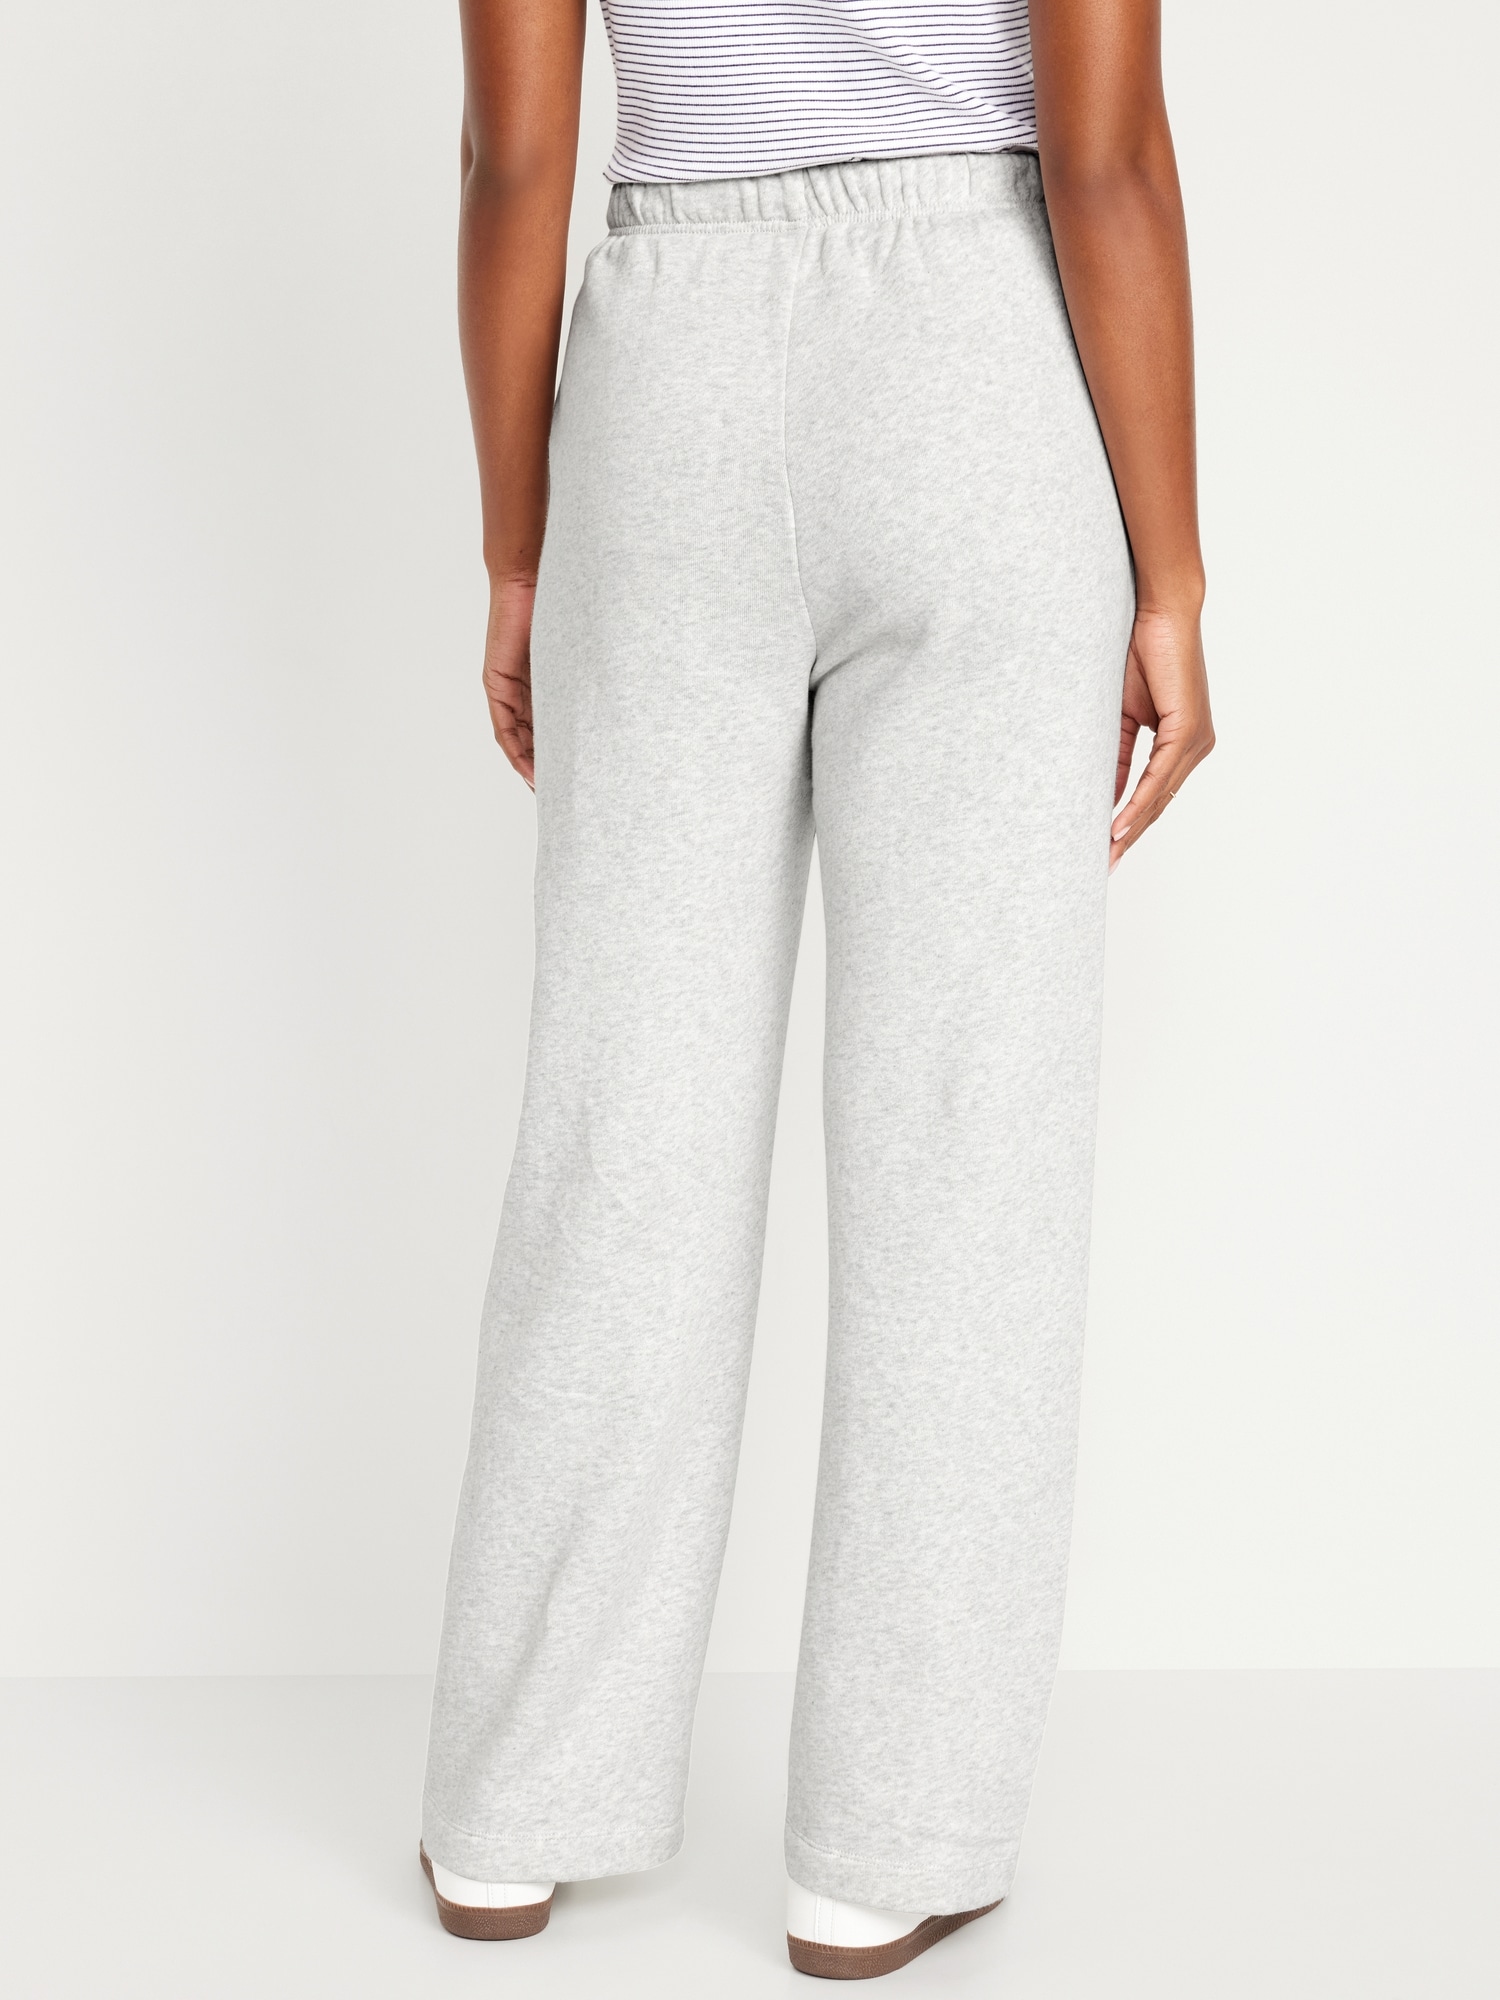 Extra High-Waisted Vintage Logo Sweatpants for Women | Old Navy